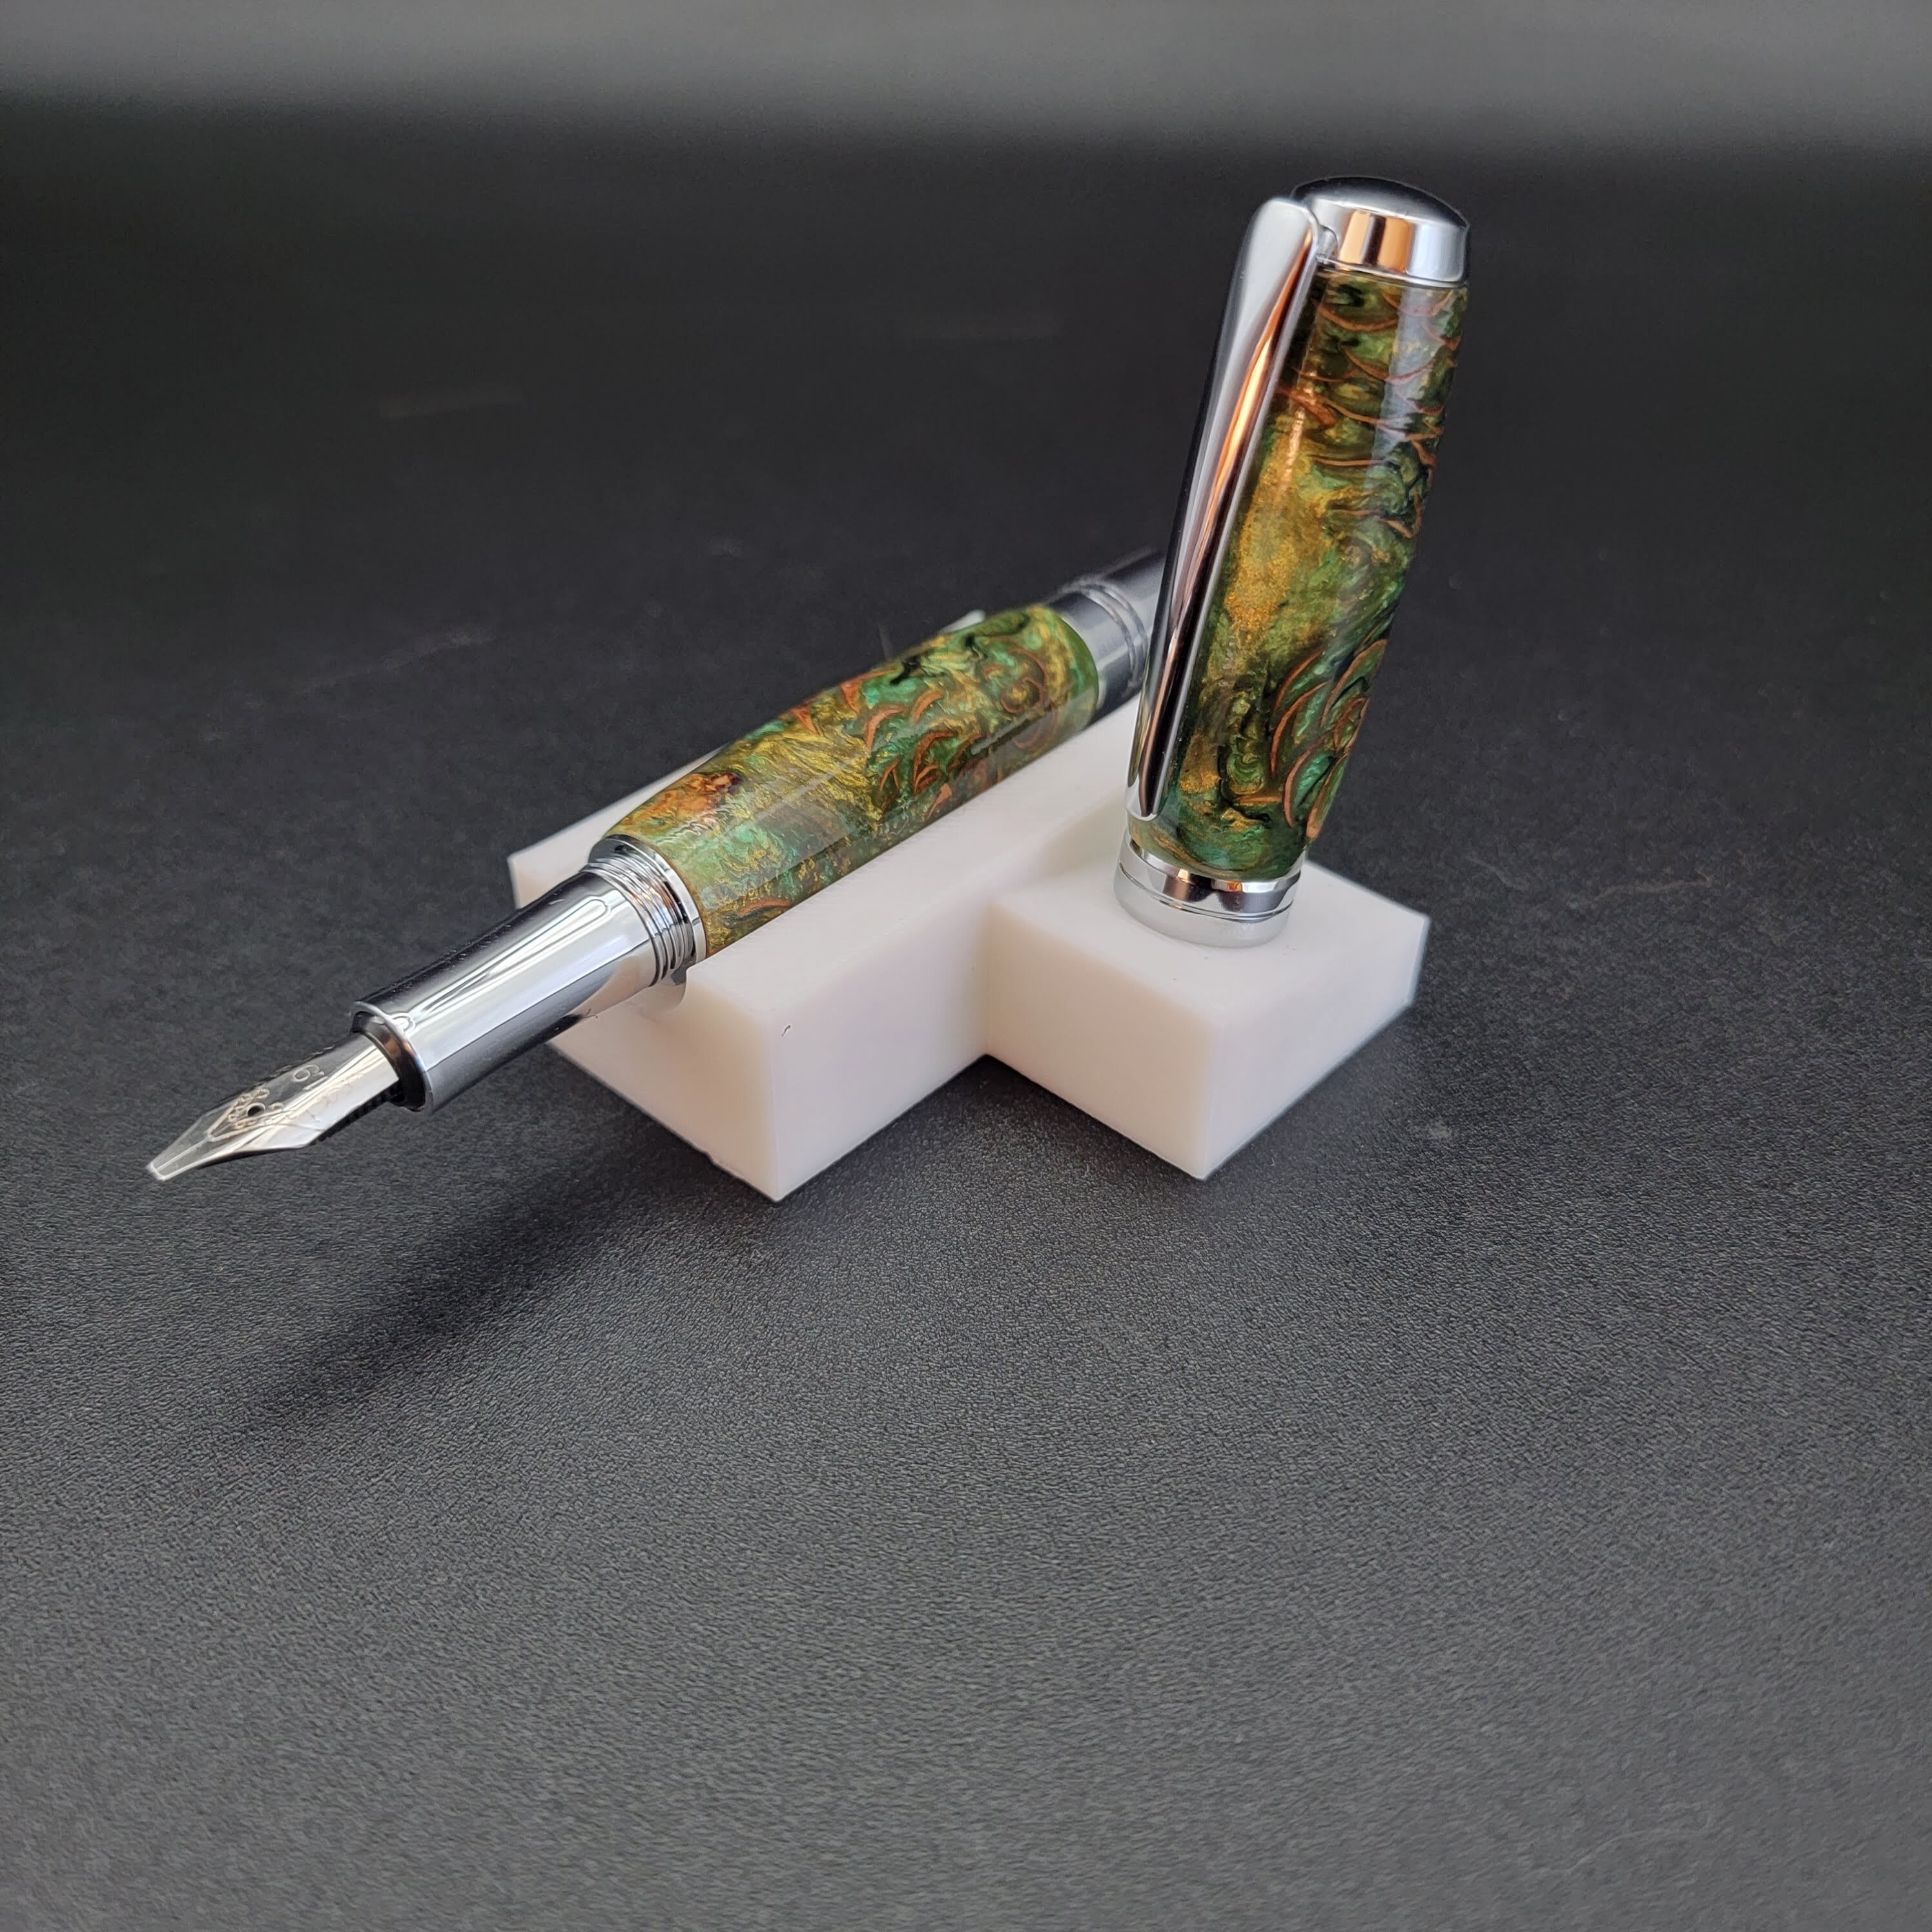 Hethrone Feather Pen Glass Pen Fountain Pen Calligraphy Pen Set with Ink  Unique Gift For Calligraphy